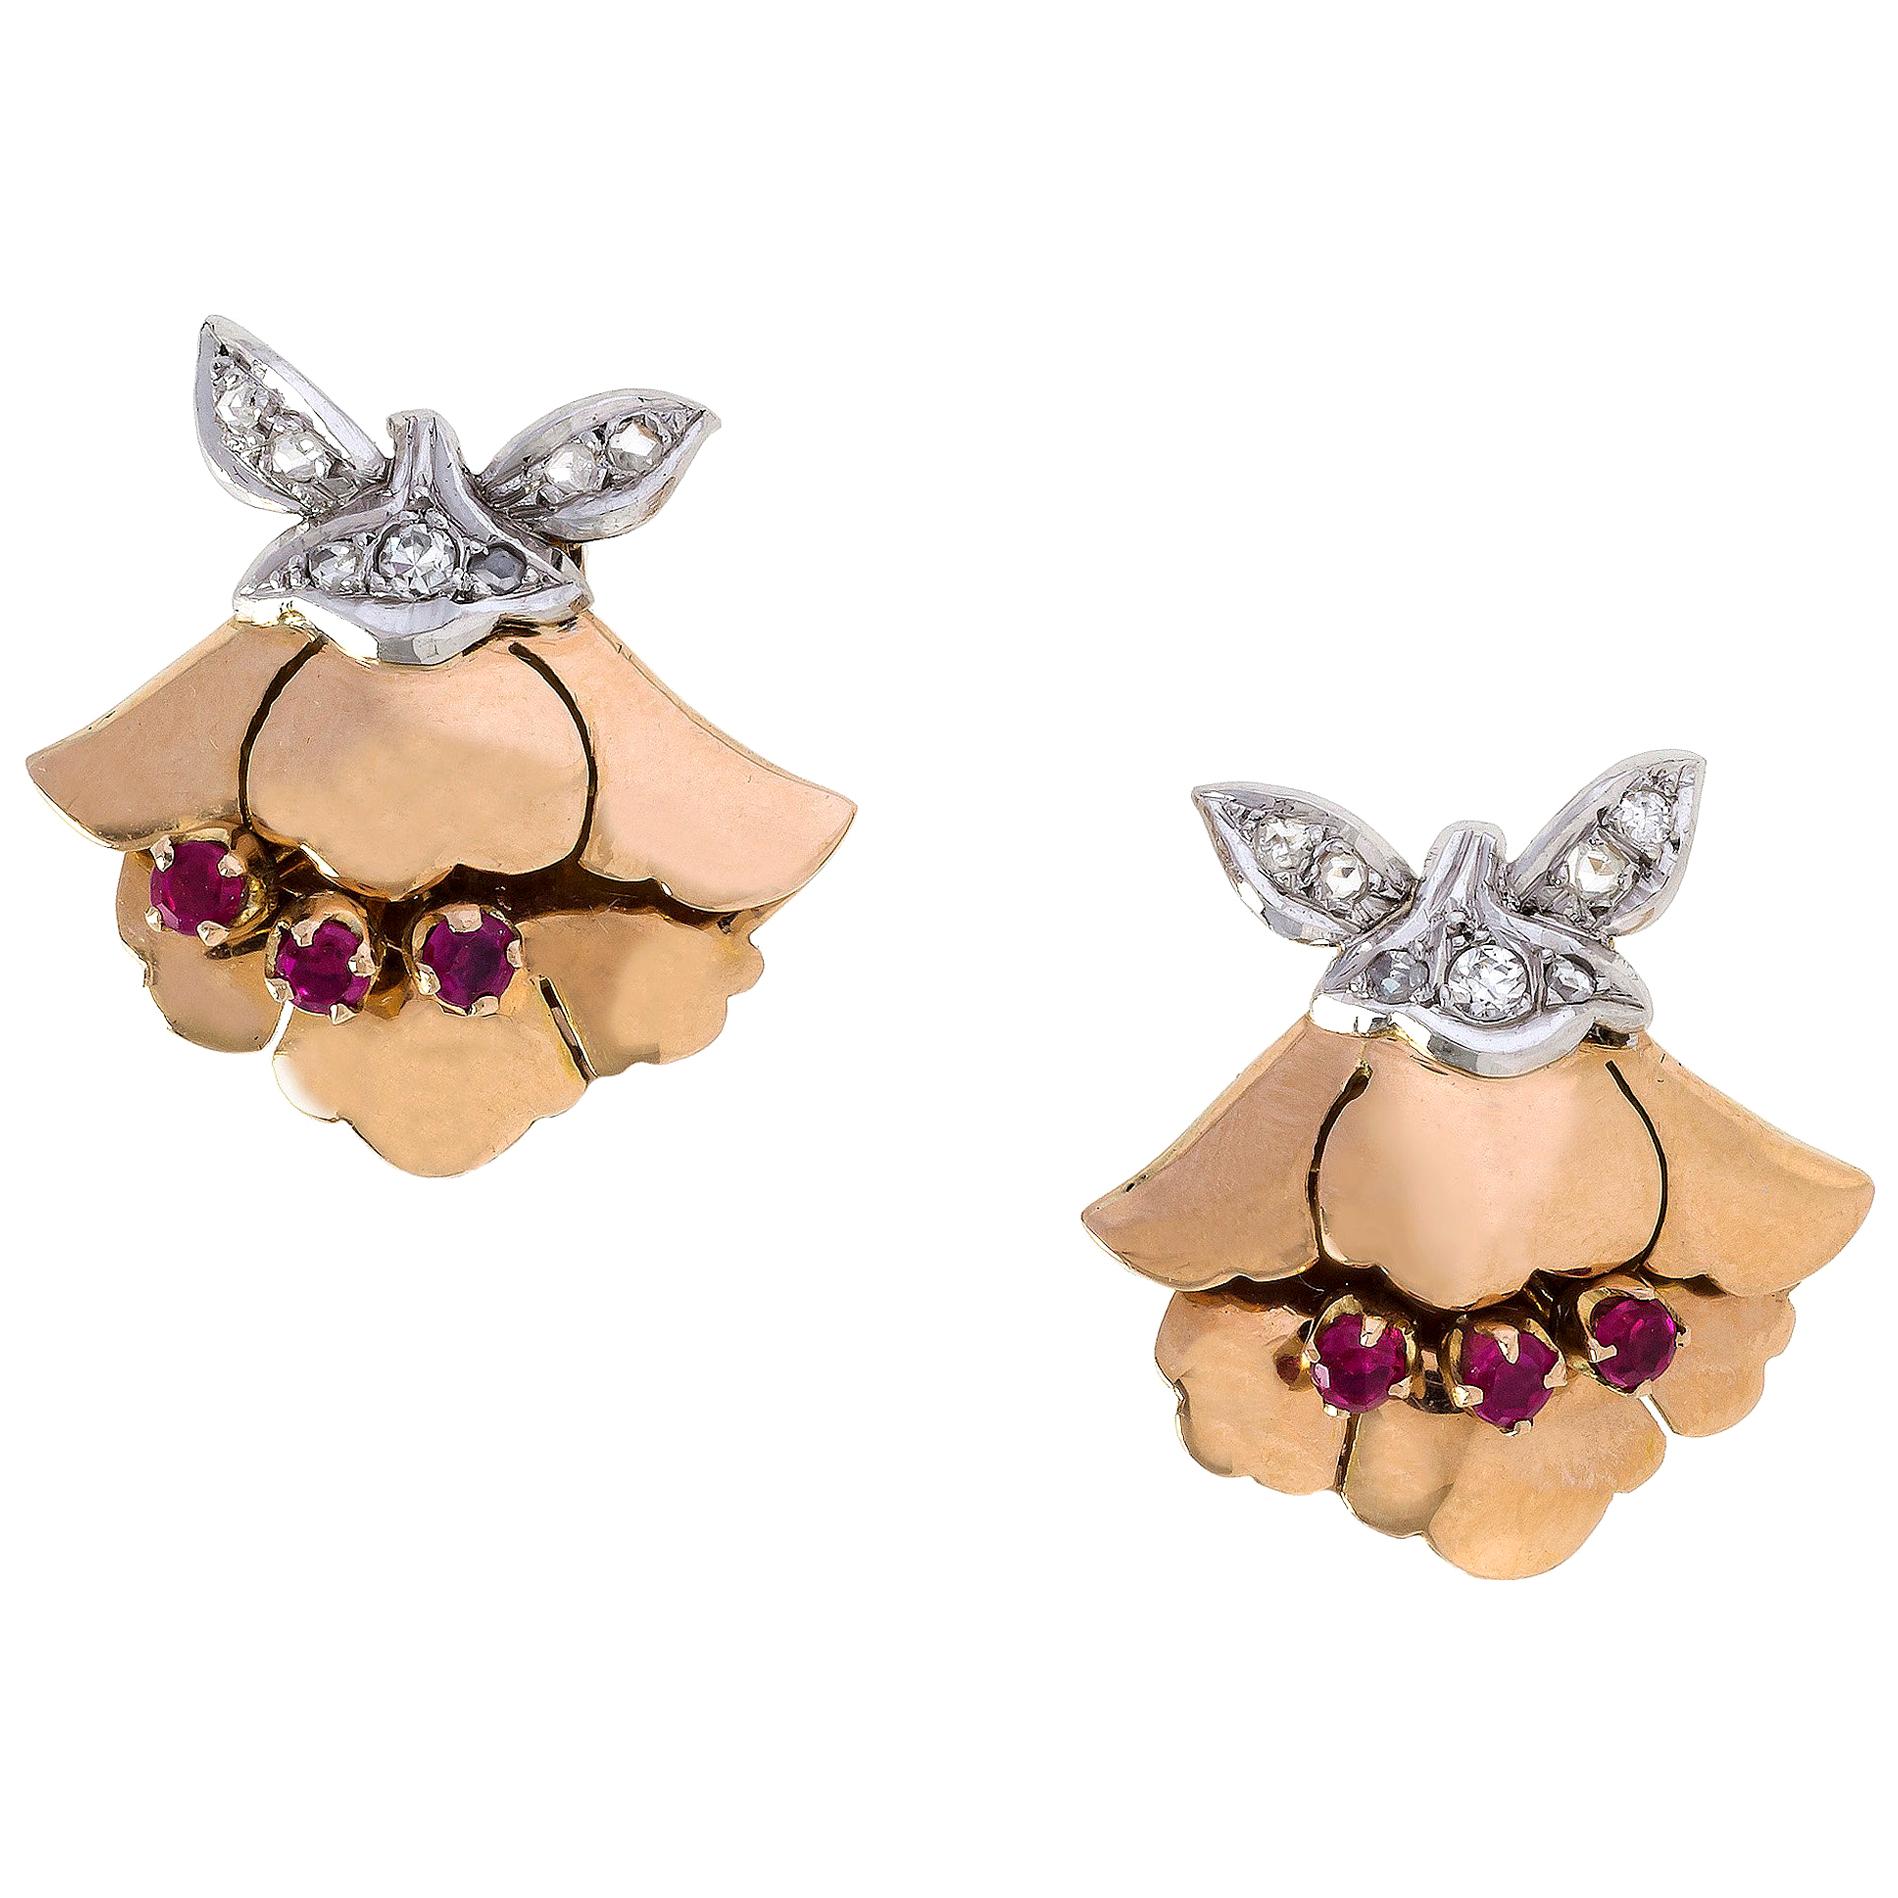 The 14 k gold earclips can also be worn as dressclips. They are designed as flowers with ruby set pistils and small leaves. The receptacles and leaves are made out of 14 k white gold and set with diamonds. The earclips are marked 585 and show